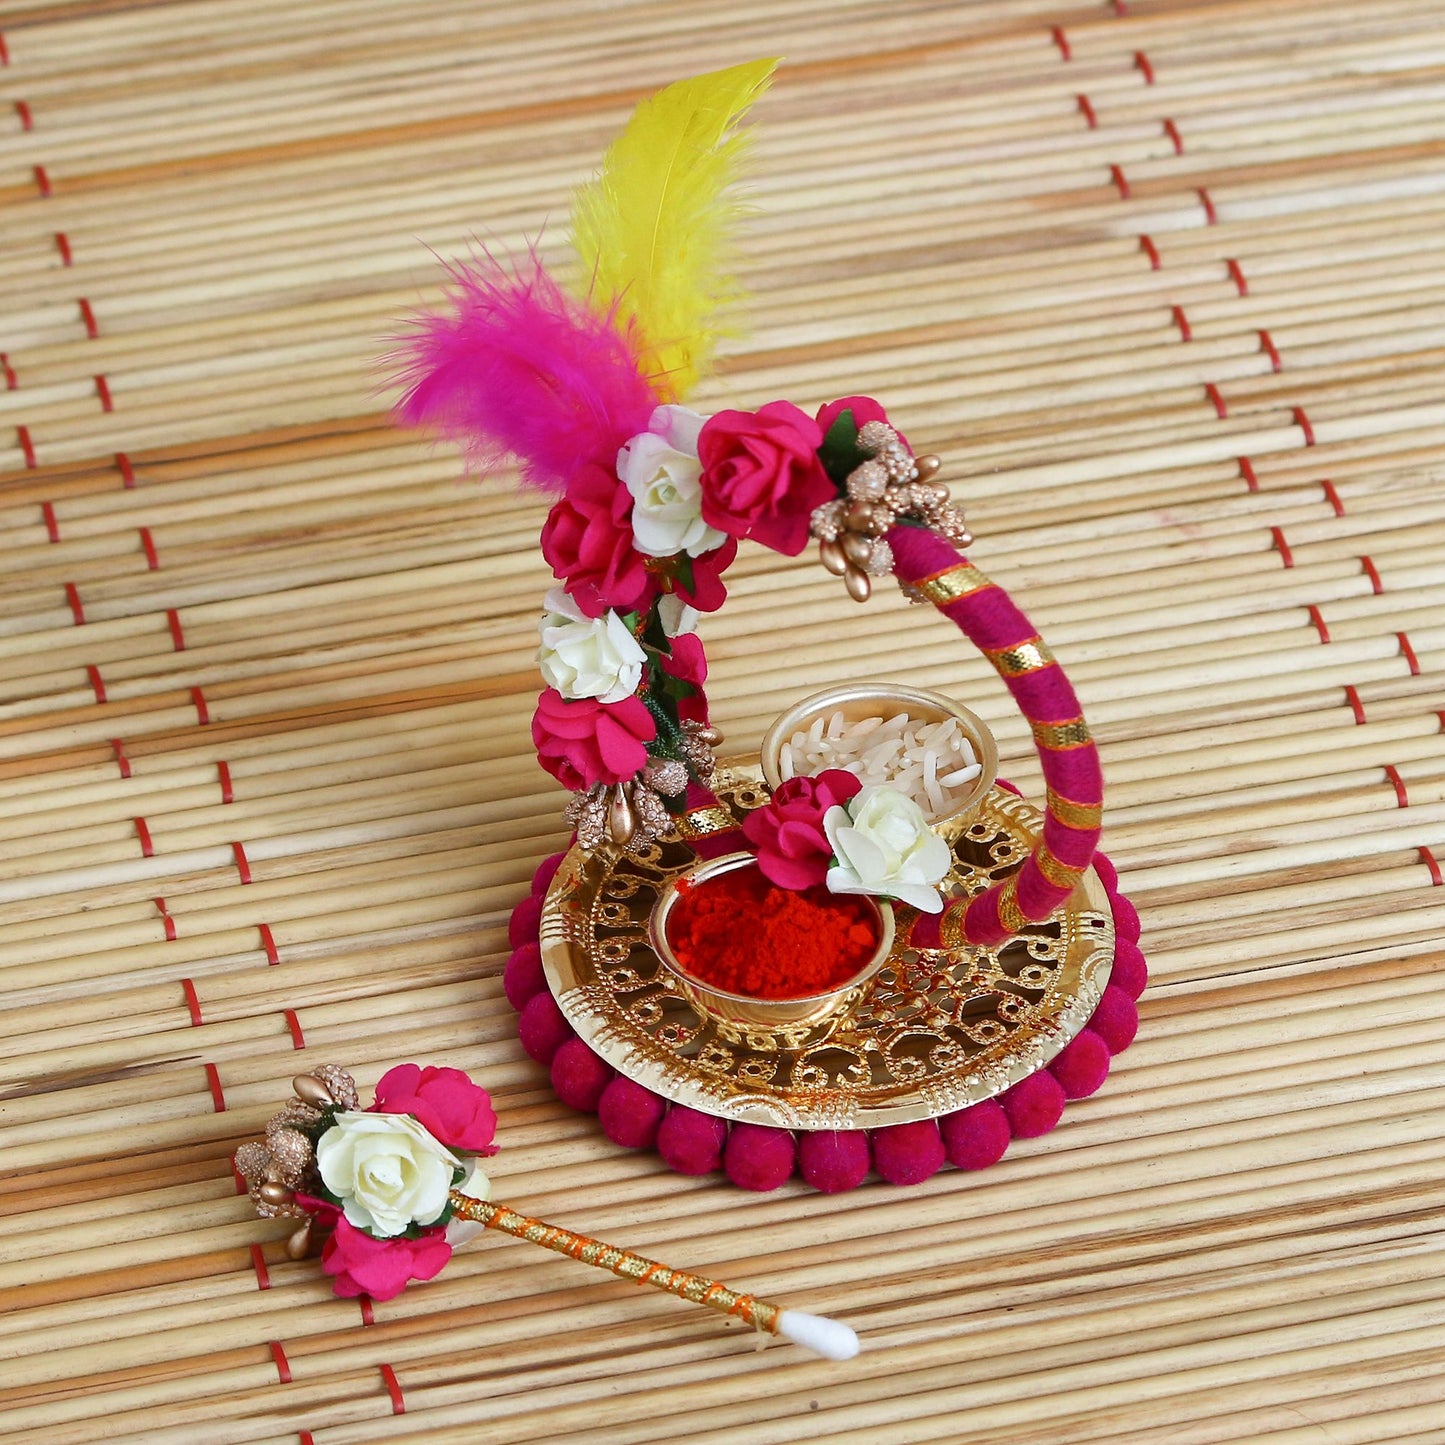 eCraftIndia Handcrafted Decorative Roli Tikka Holder with designer stick and Colorful Feathers